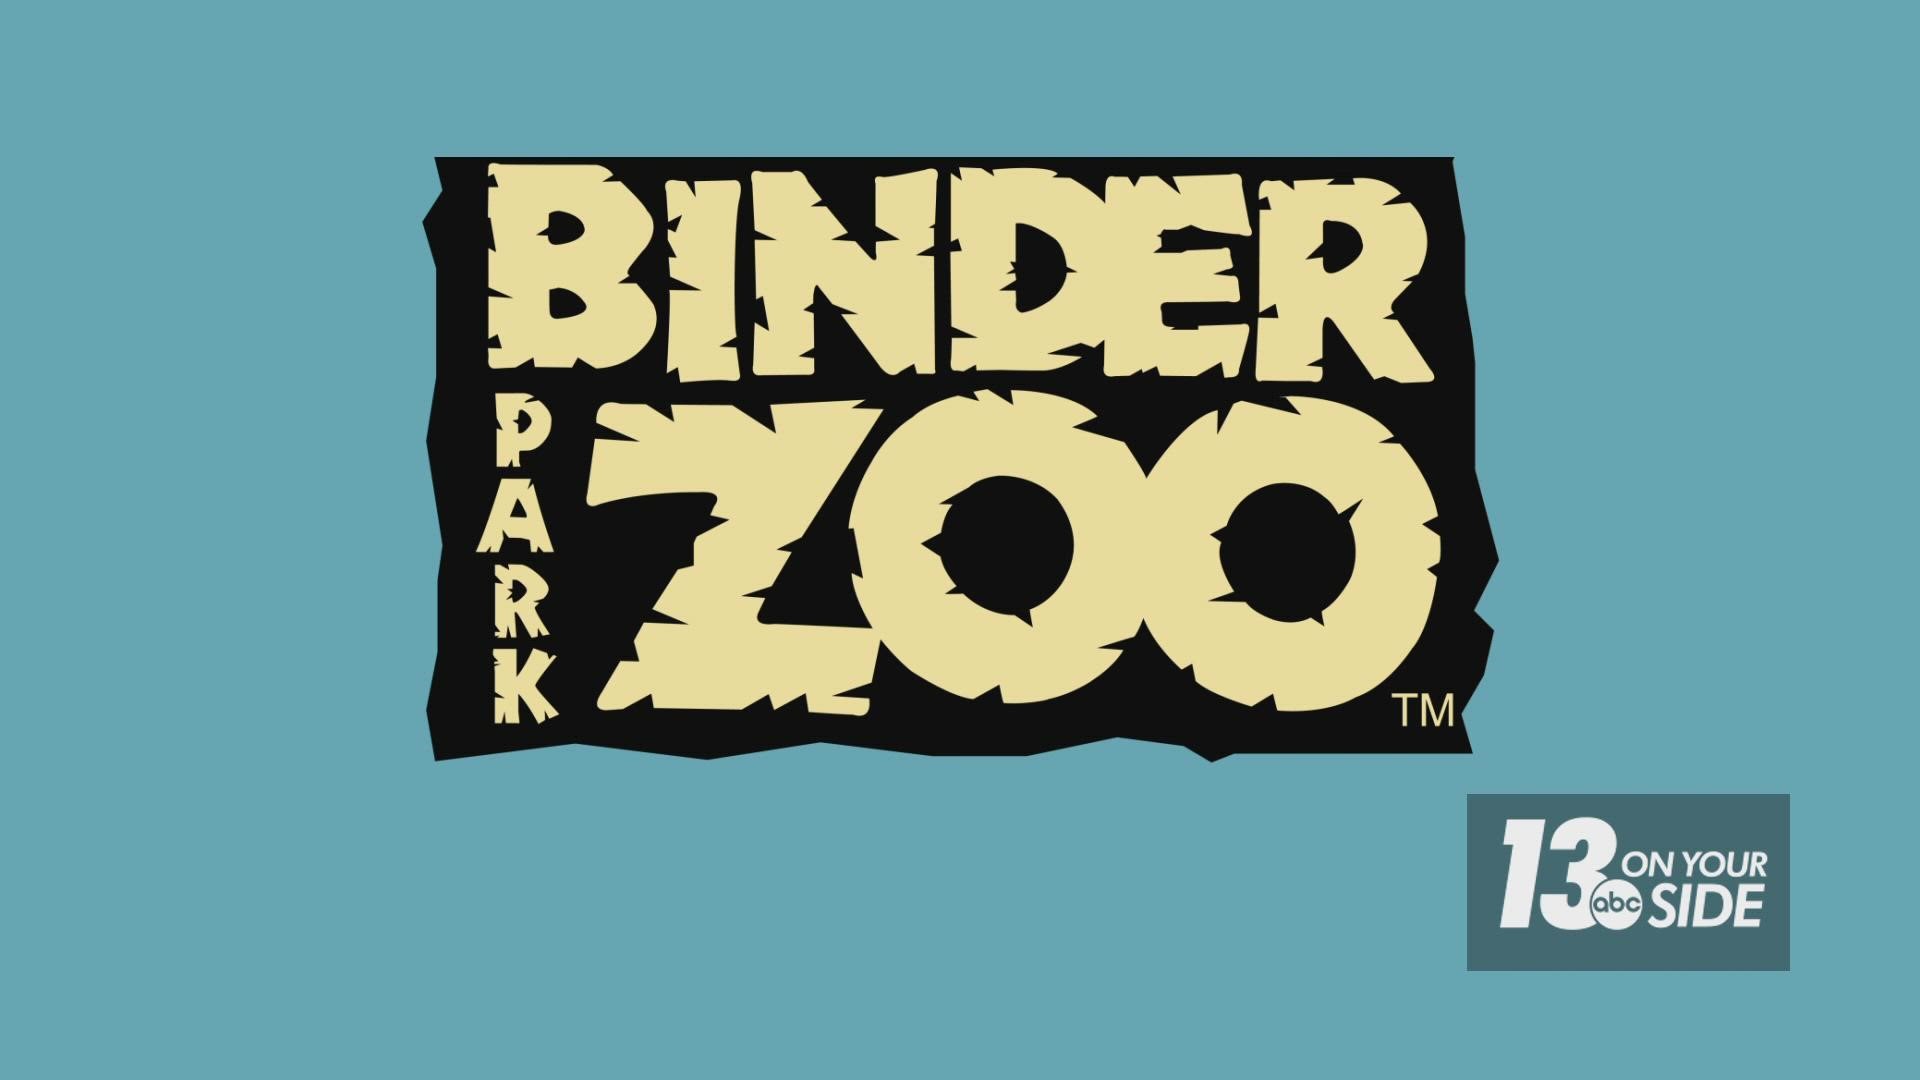 Come to Binder Park Zoo to see the animals, visit Zoorassic Park and go on the new zipline!